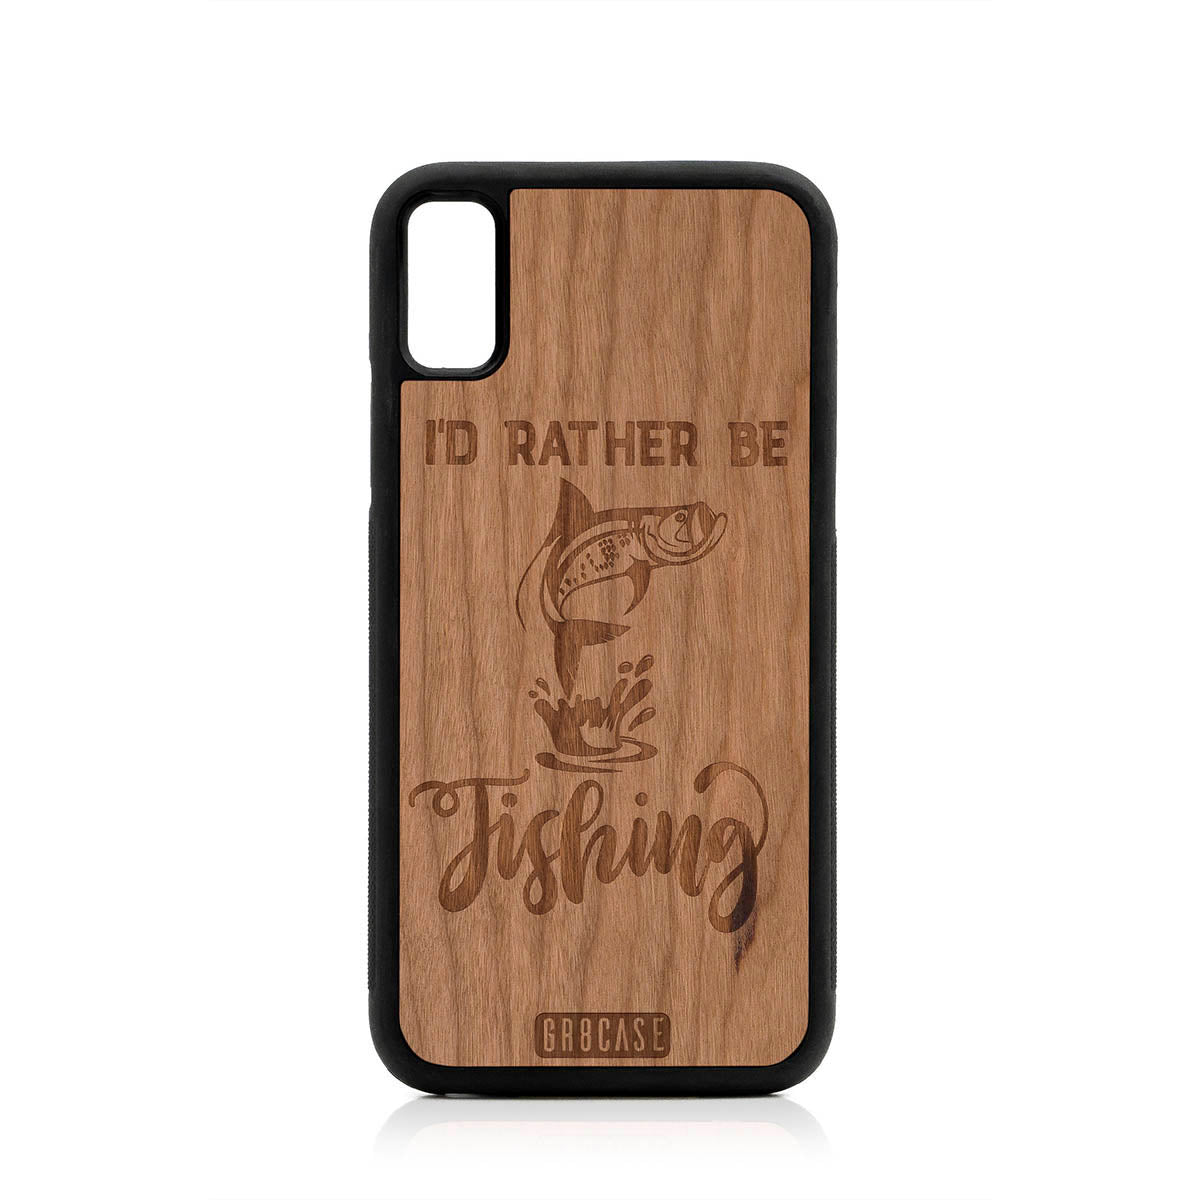 I'D Rather Be Fishing Design Wood Case For iPhone XR